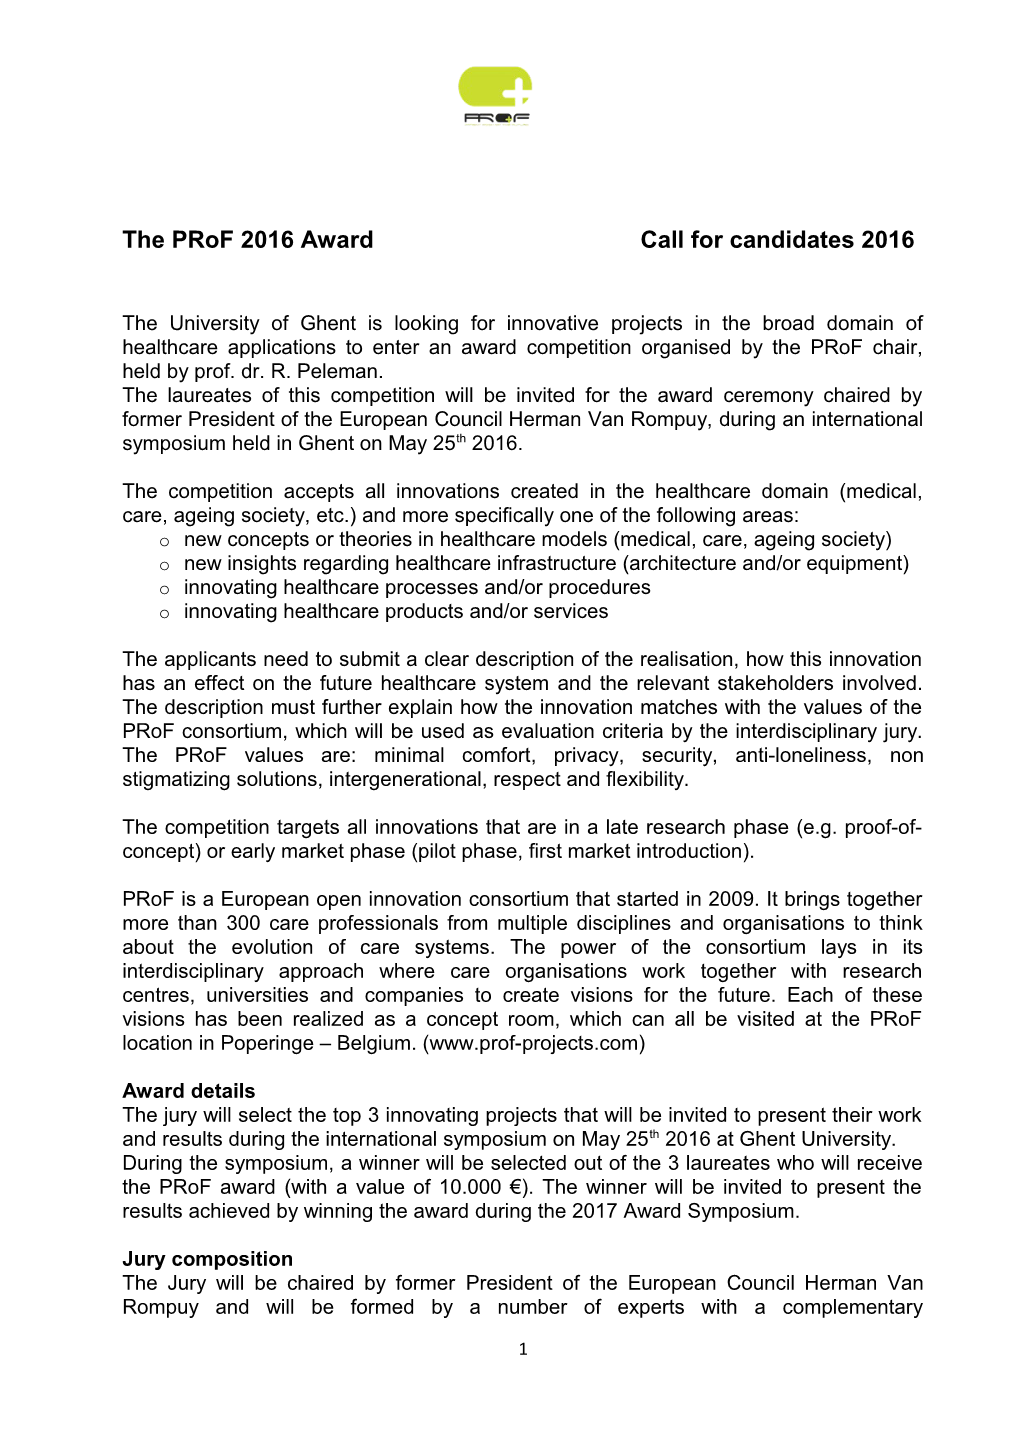 The Prof 2016Award Call for Candidates 2016